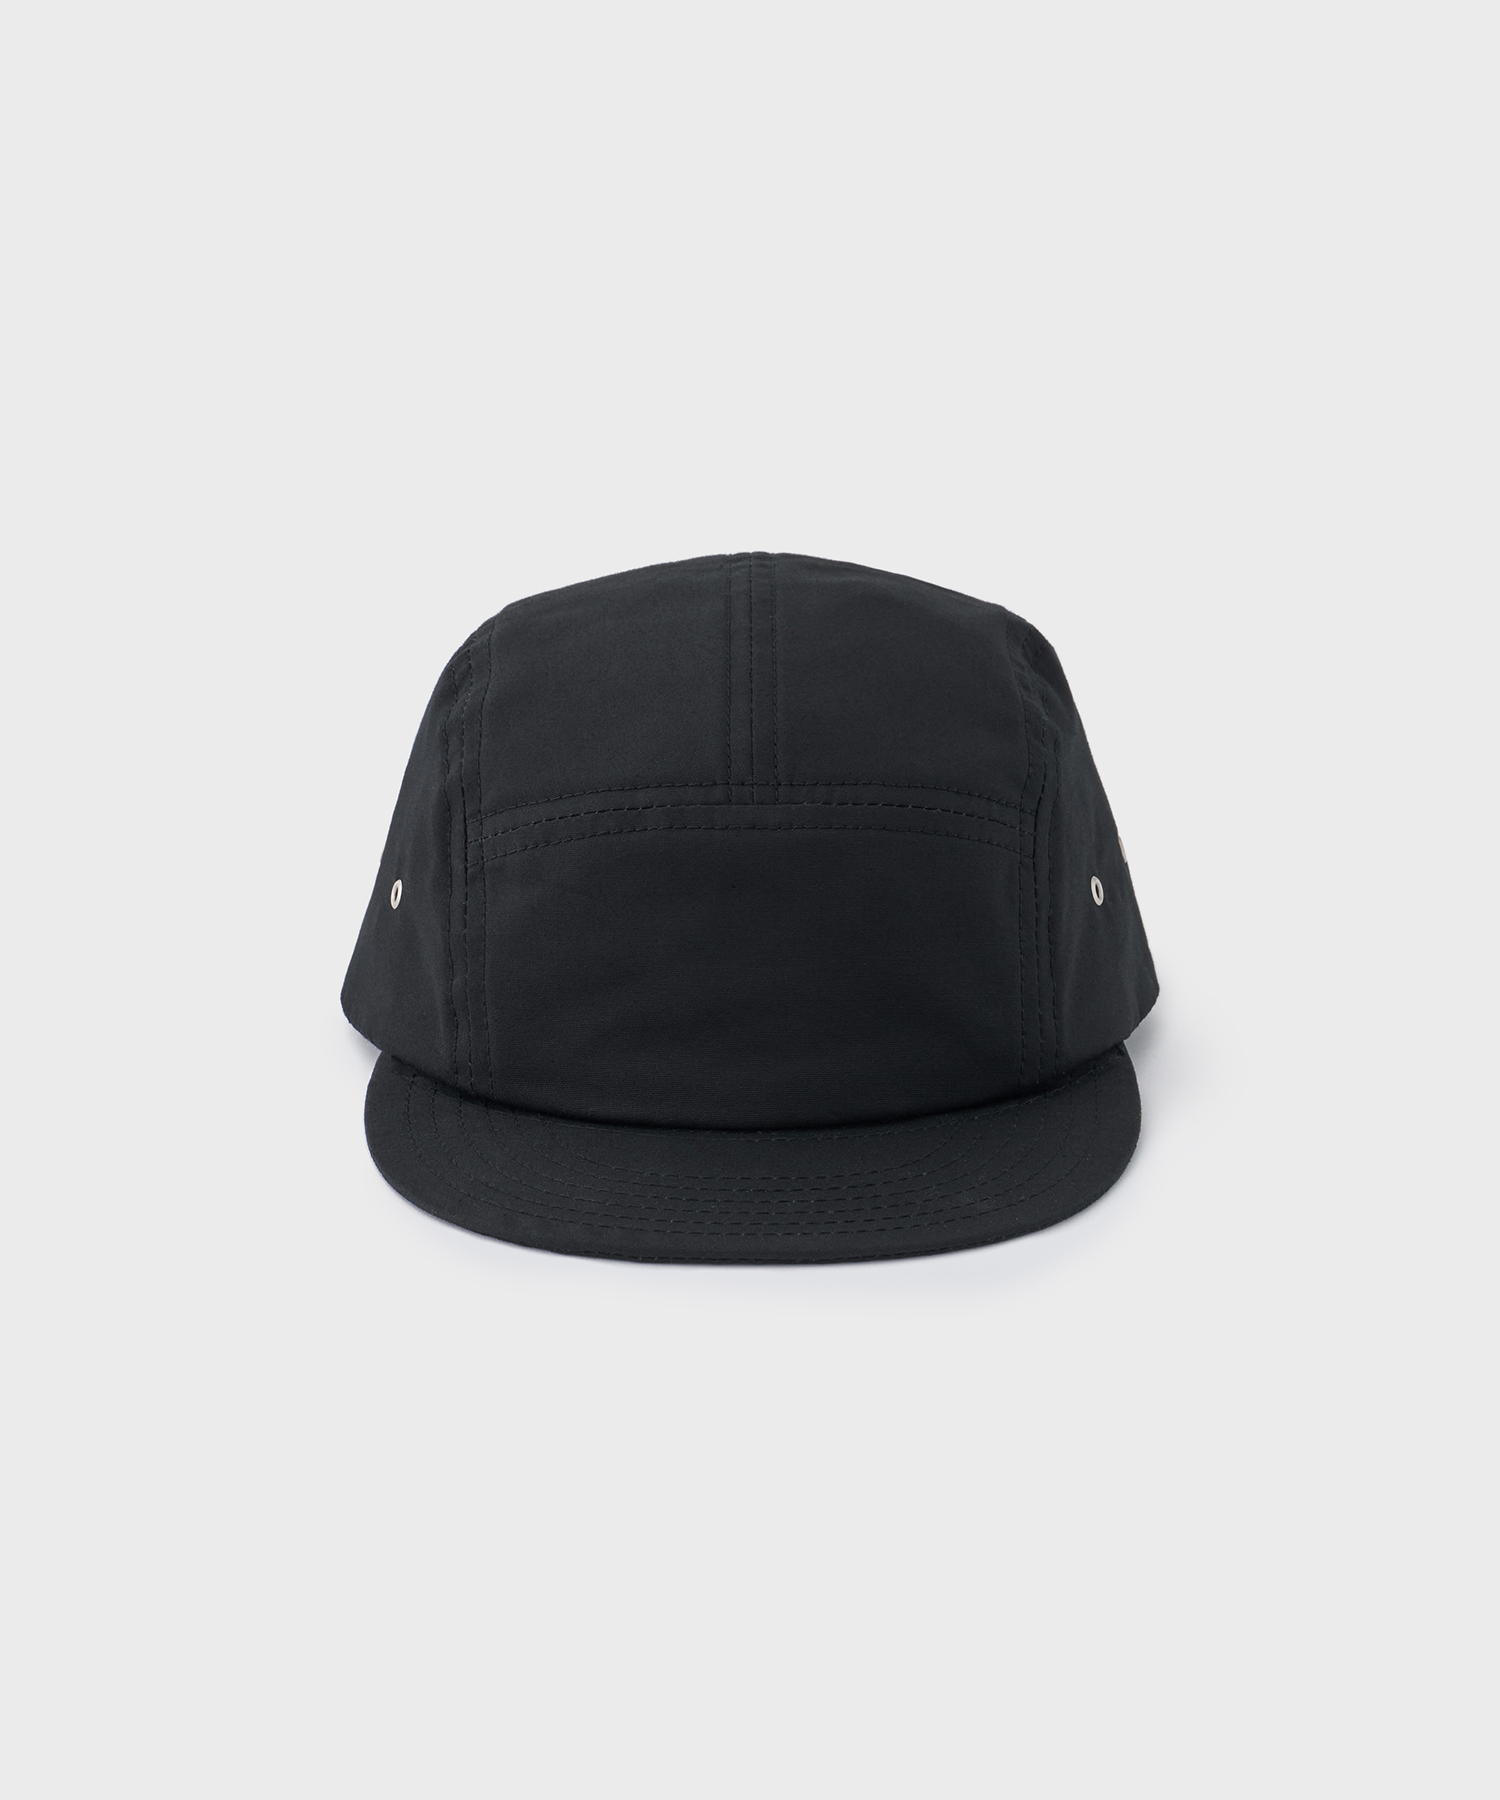 RACAL for A/O. Exclusive Flip Up Jet Ventile Cap (Black)